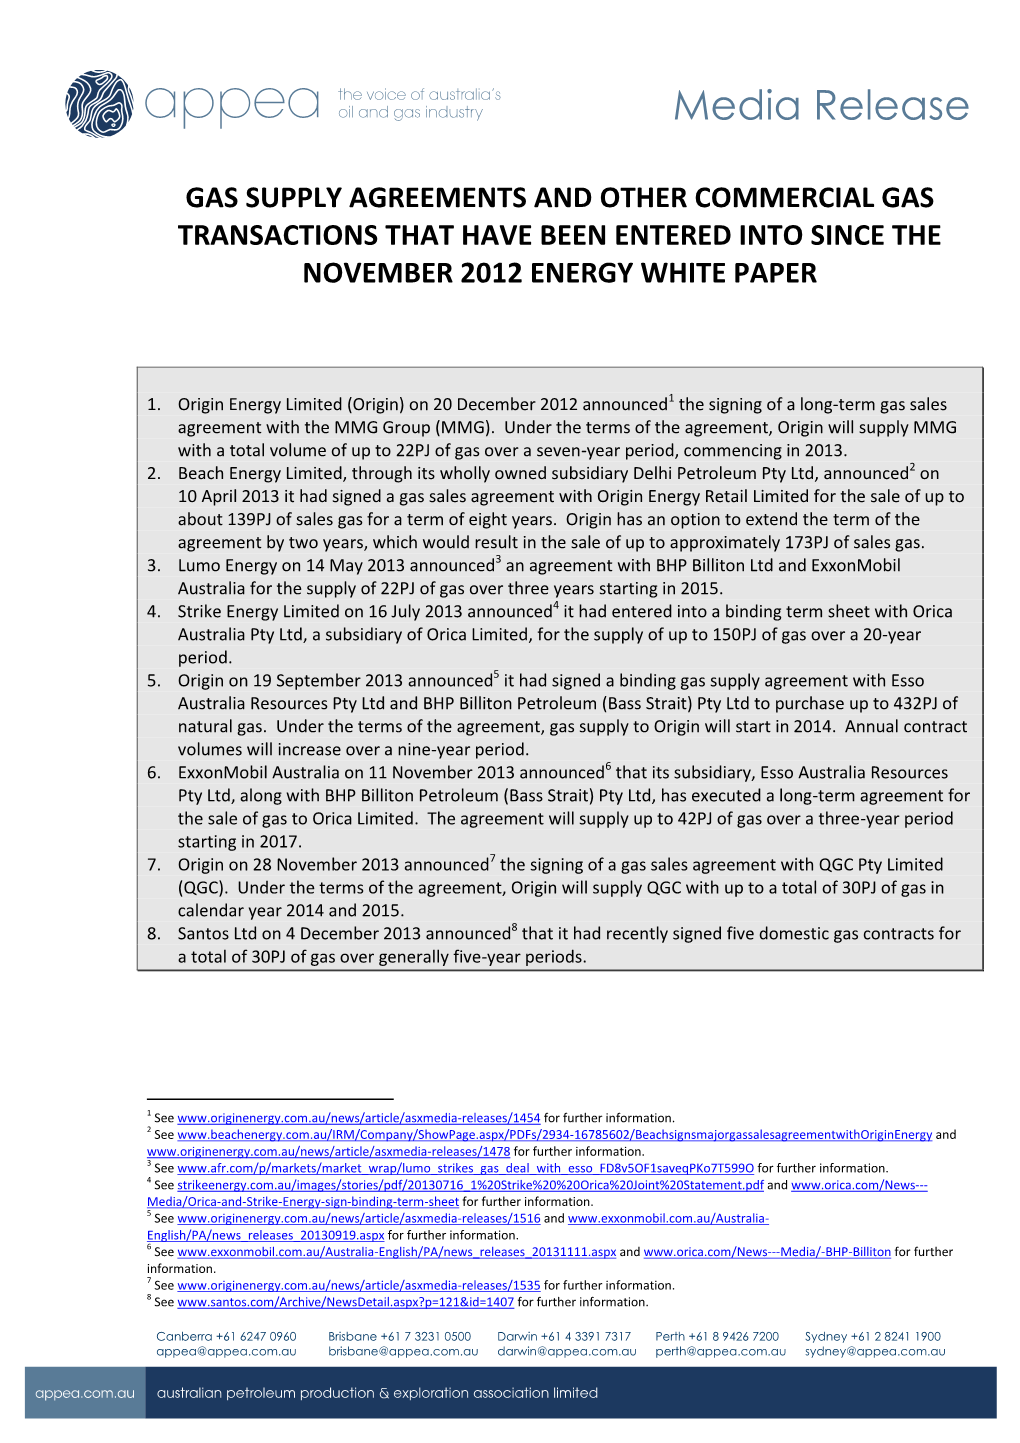 Gas Supply Agreements and Other Commercial Gas Transactions That Have Been Entered Into Since the November 2012 Energy White Paper